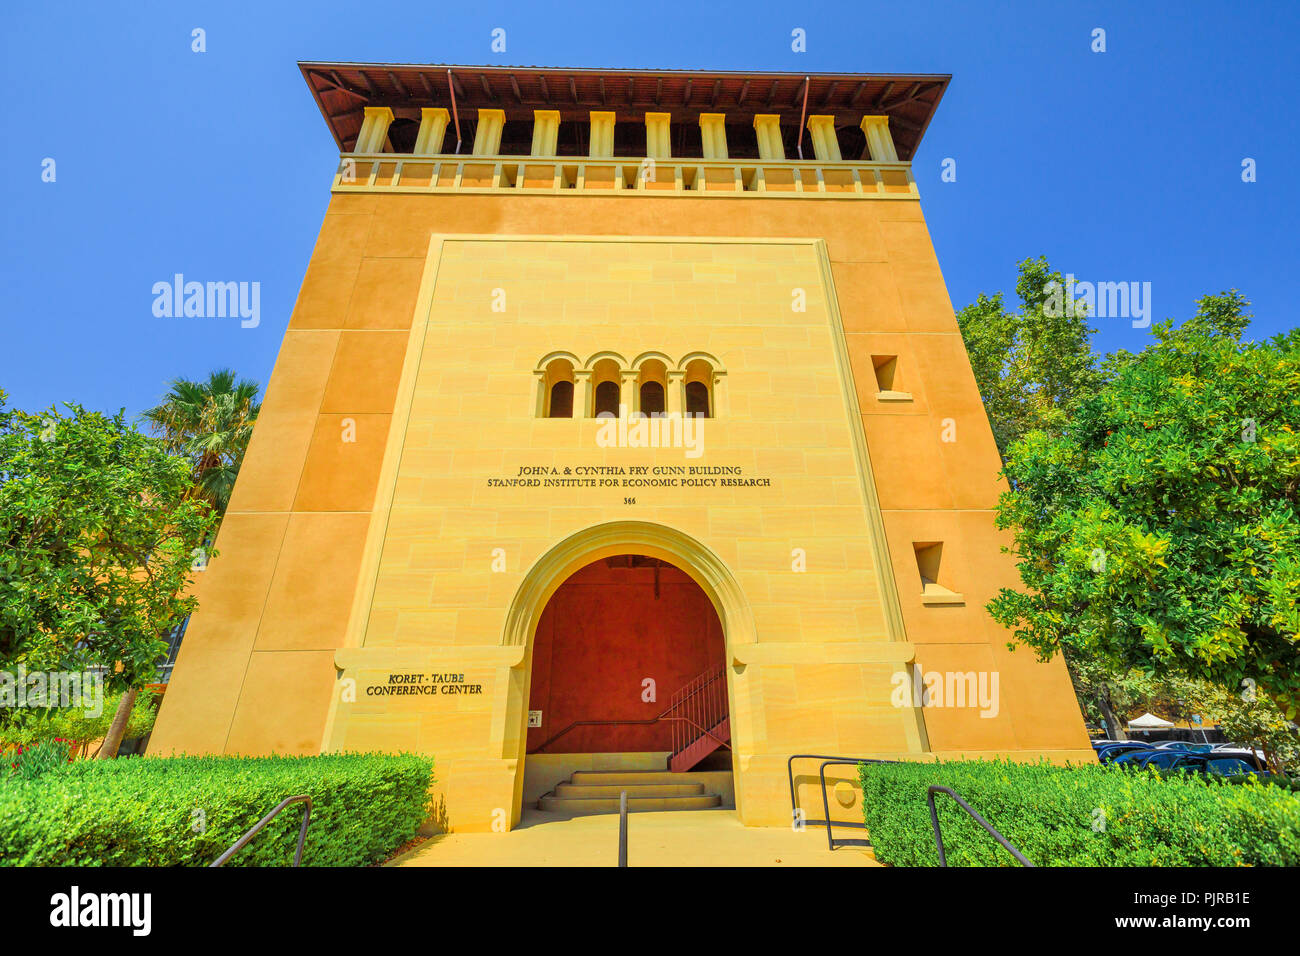 Palo Alto, California, United States - August 13, 2018: Stanford Institute Economic Policy Research. Stanford University, Silicon Valley, is one of world's leading teaching and research institutions. Stock Photo